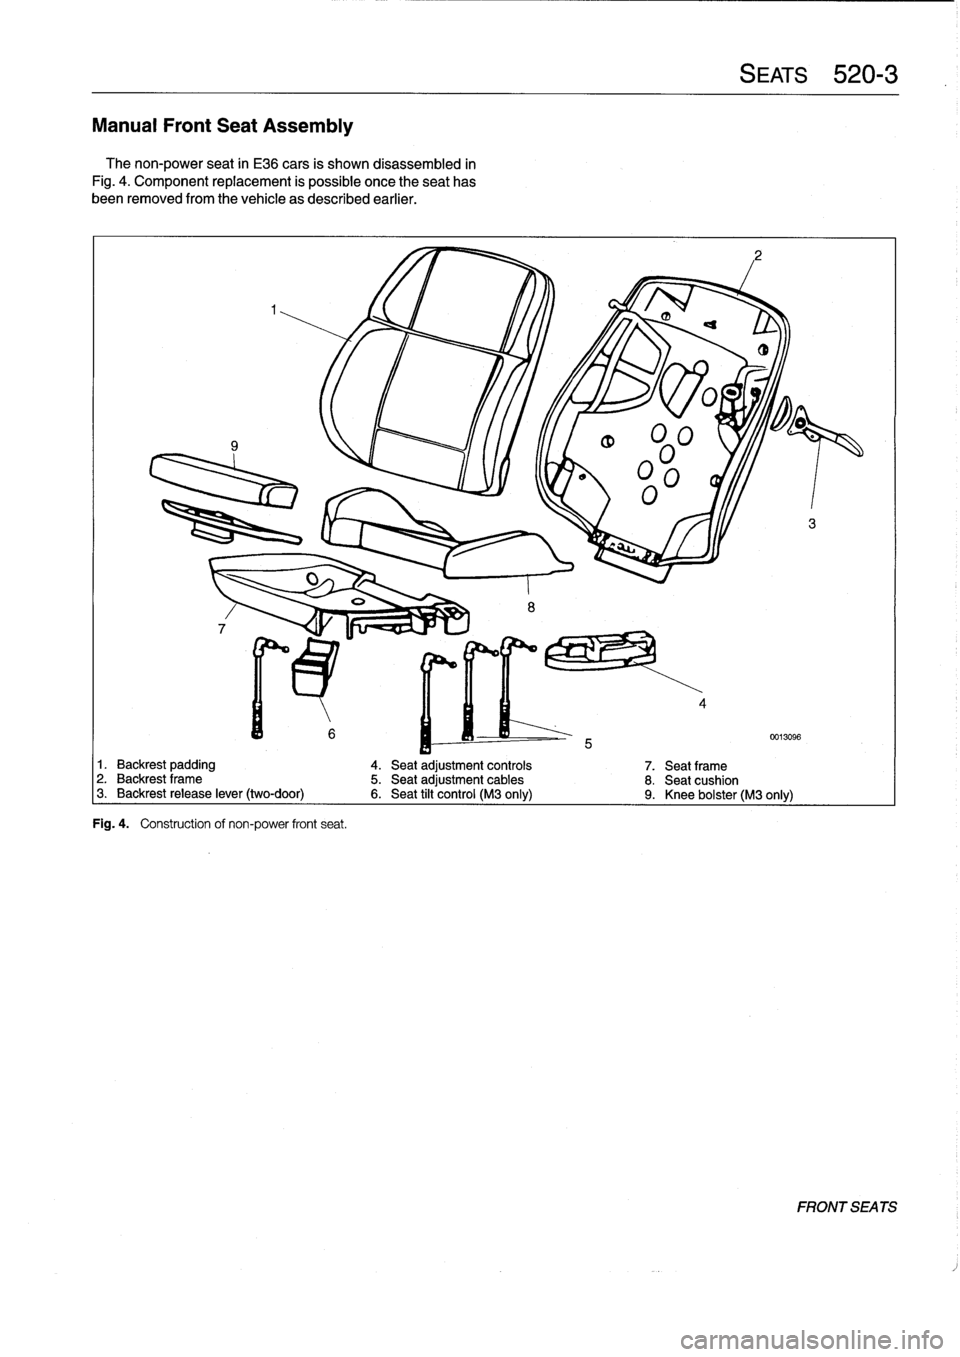 BMW 328i 1993 E36 Workshop Manual 
Manual
Front
Seat
Assembly

The
non-power
seat
in
E36
cars
is
shown
disassembled
in

Fig
.
4
.
Component
replacement
is
possible
once
theseat
has

been
removed
from
the
vehicle
as
described
earlier
.